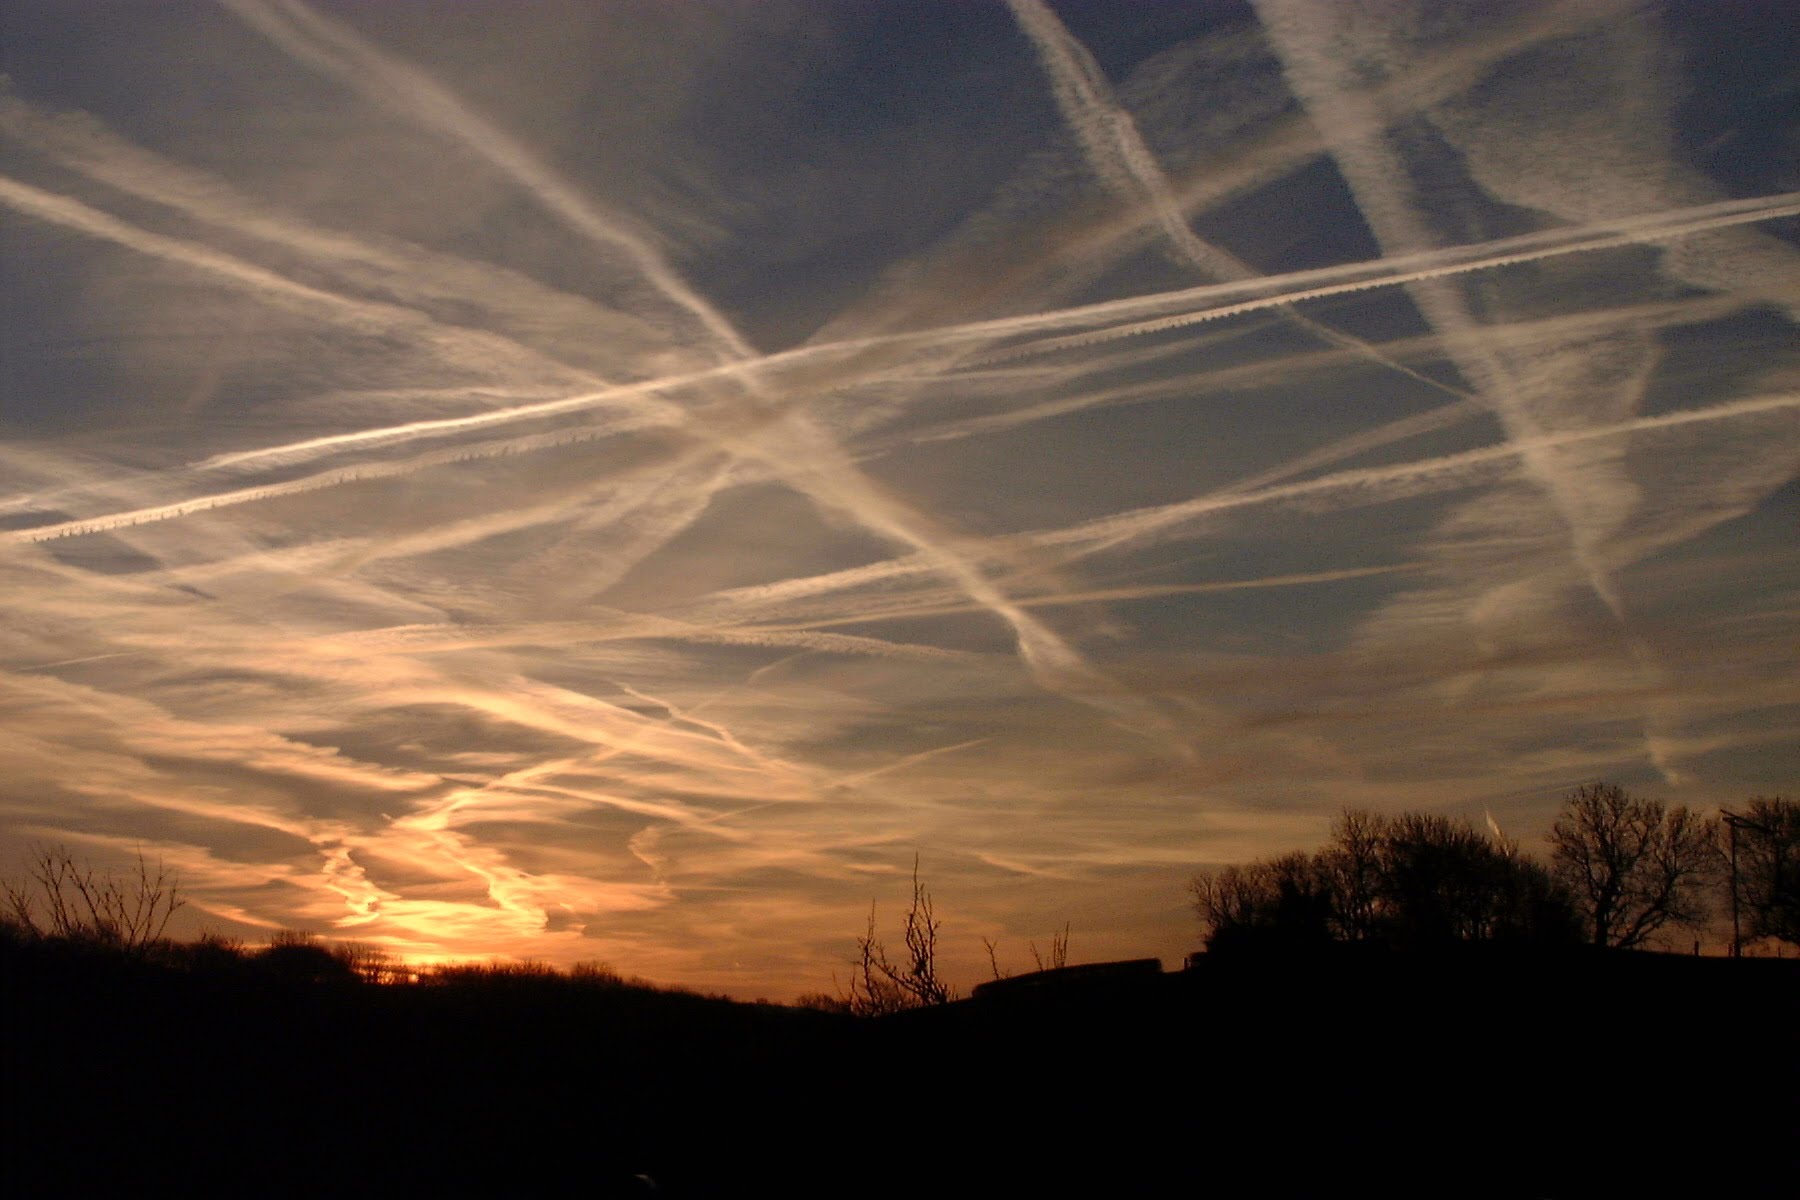 If geoengineering is not stopped it will destroy all planetary life